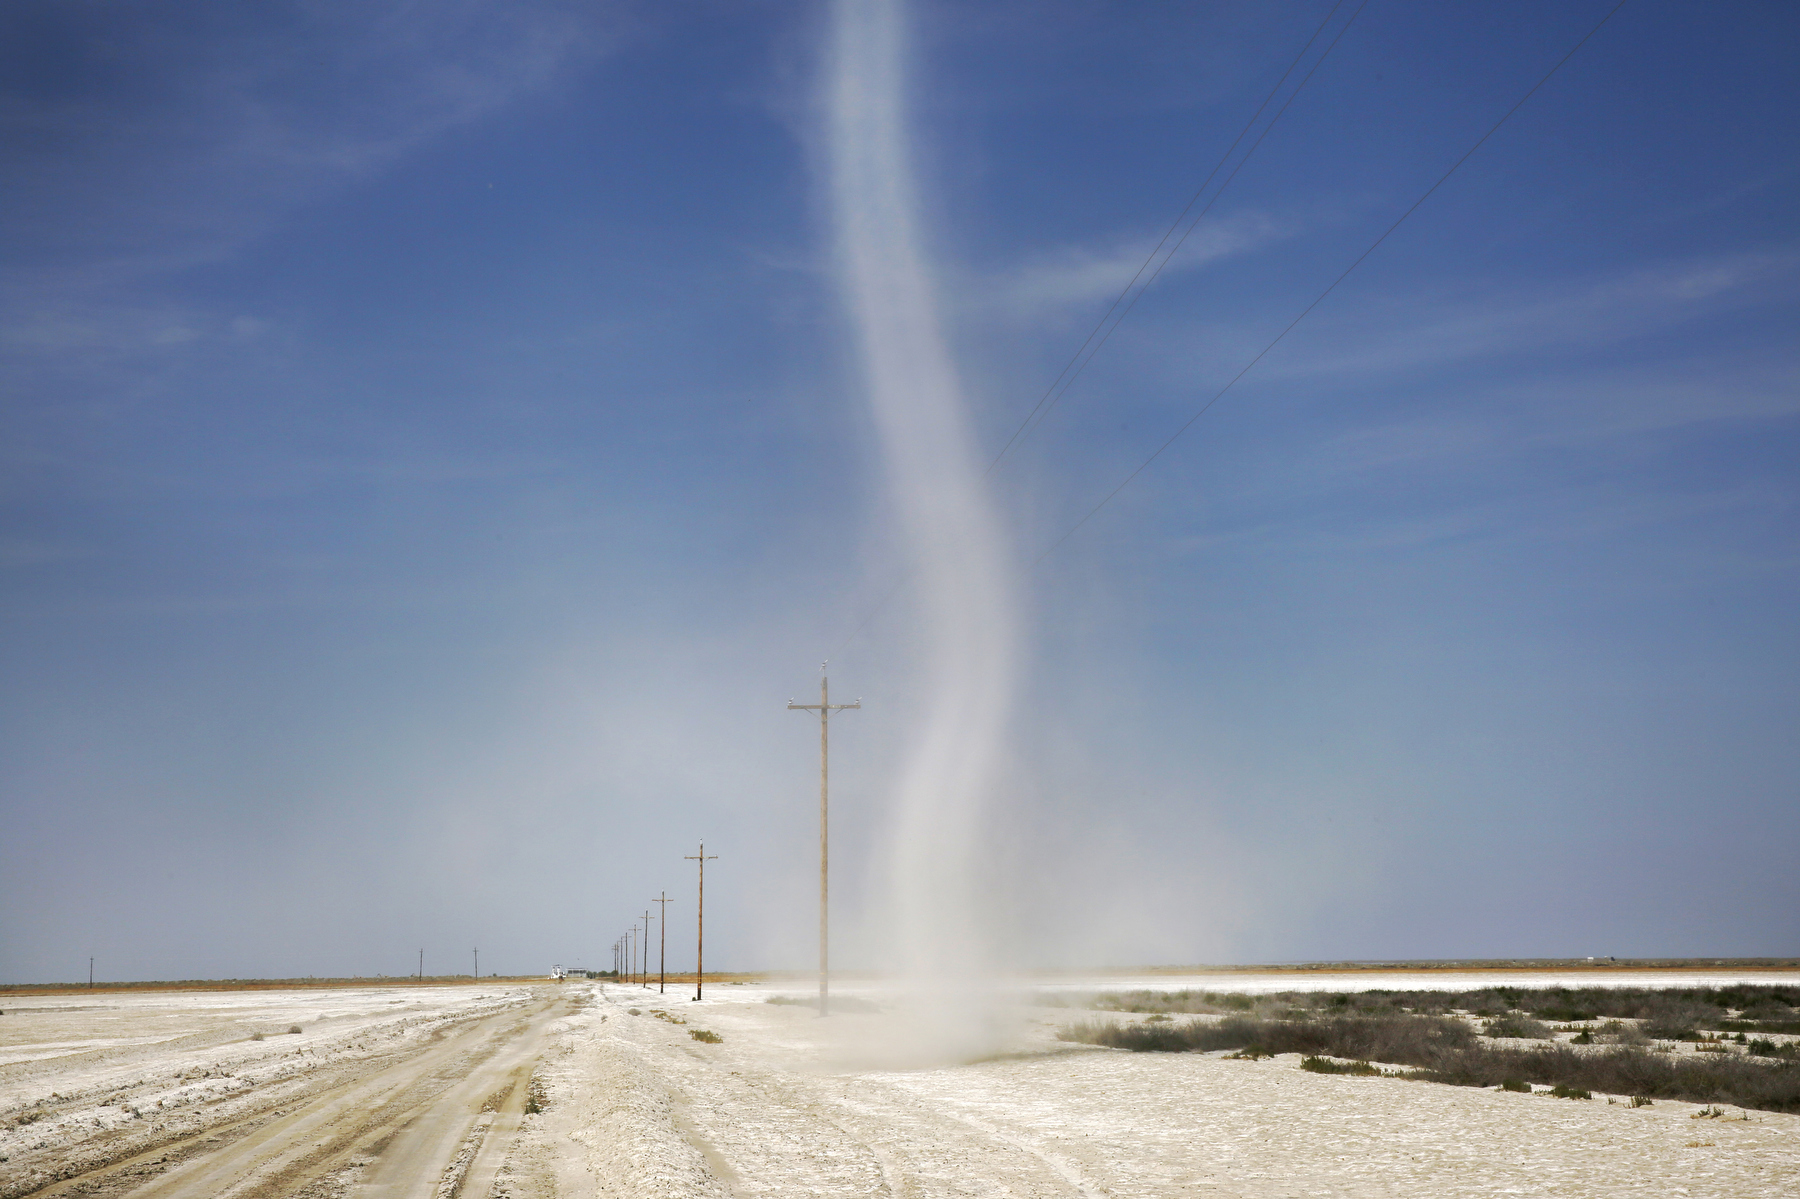 A dust devil makes its way across hot land made white from dried minerals as a result of the natural lake-bottom buildup and evaporation process April 10, 2015 near Kings County, Calif. The land is situated in part of the San Joaquin Valley that used to contain the Tulare Lake, the largest freshwater lake in the western half of the continental United States. The lake was dried up by the year 1900 due to emerging agriculture in the region.